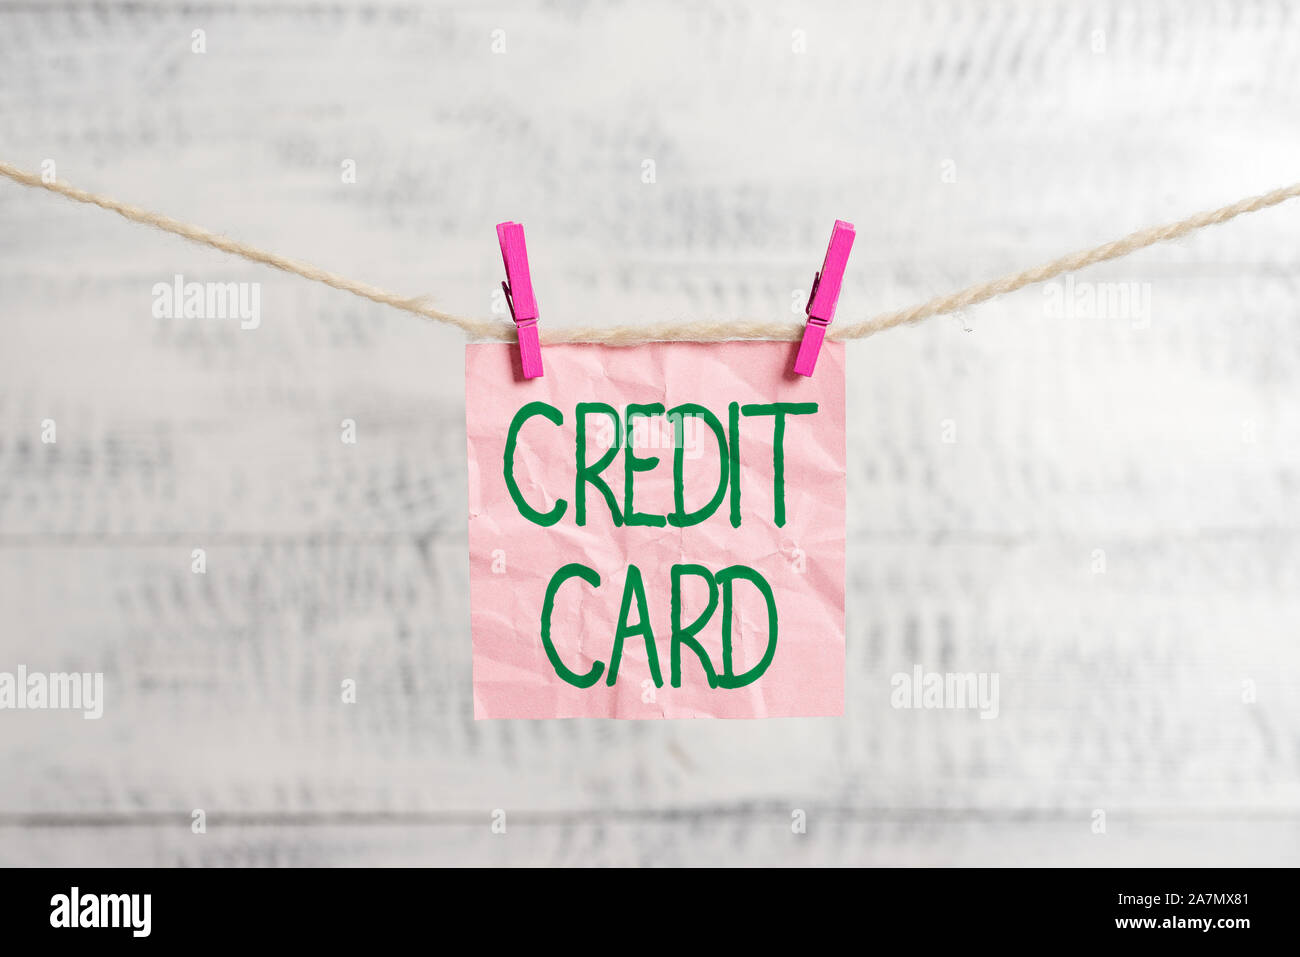 Conceptual hand writing showing Credit Card. Concept meaning card that allows you to borrow money against a line of credit Clothespin rectangle shaped Stock Photo